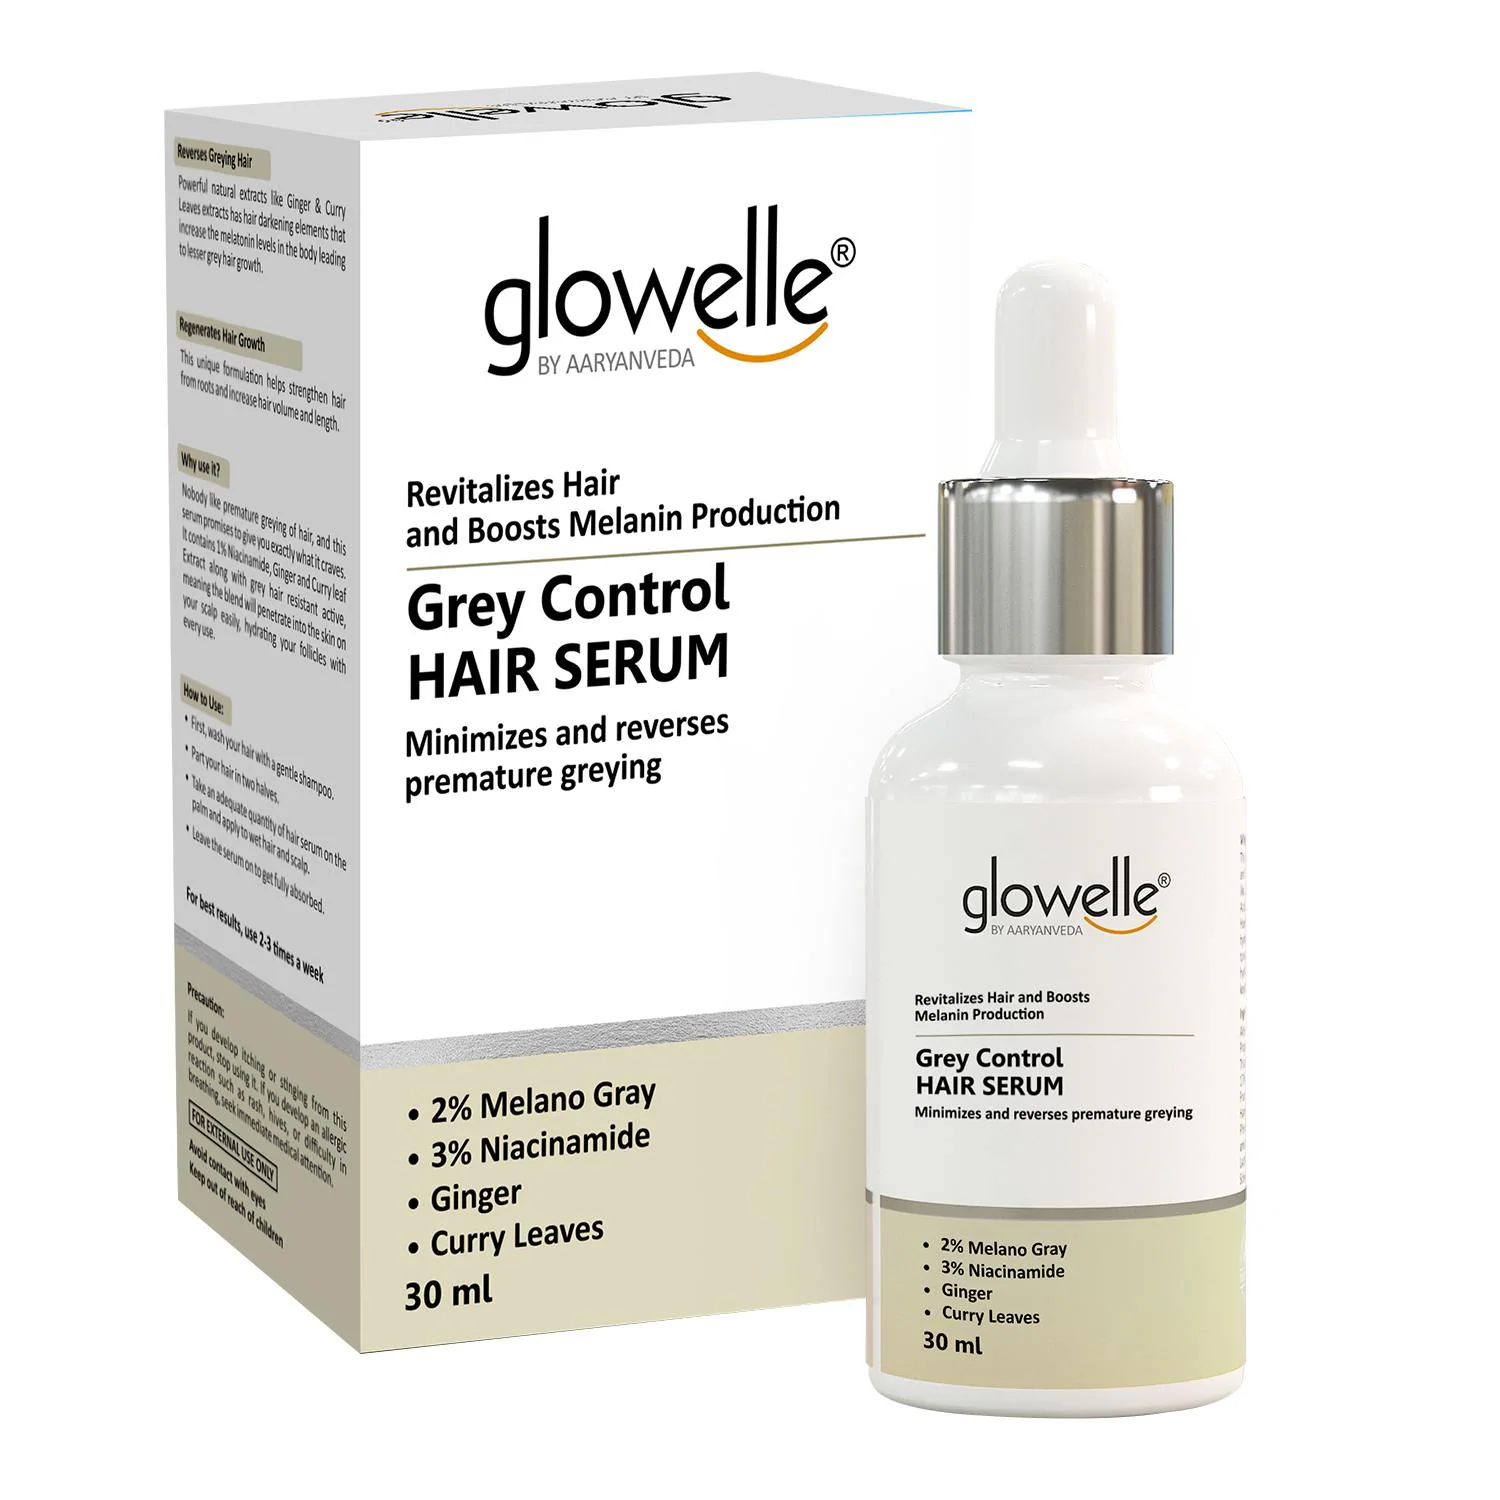 Glowelle Grey Control Hair Serum Infused with Melano Gray, Niacinamide,  Ginger and Curry Leaves, Decreases Gray hair and Boosts Melanin production  for black hair and Stimulates New Hair Growth - JioMart